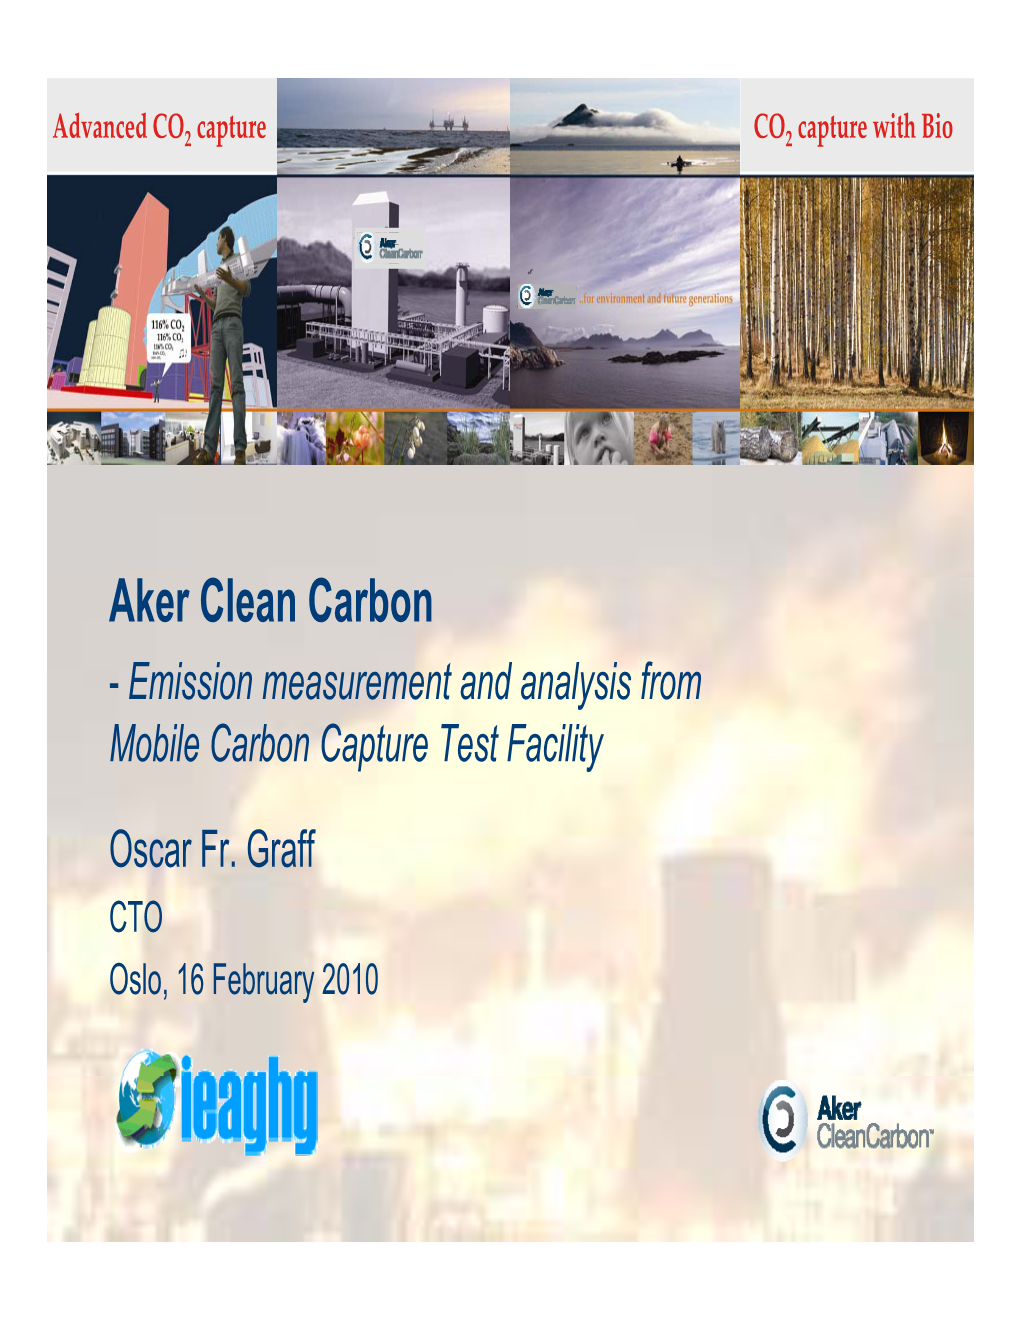 Aker Clean Carbon - Emission Measurement and Analysis from Mobile Carbon Capture Test Facility